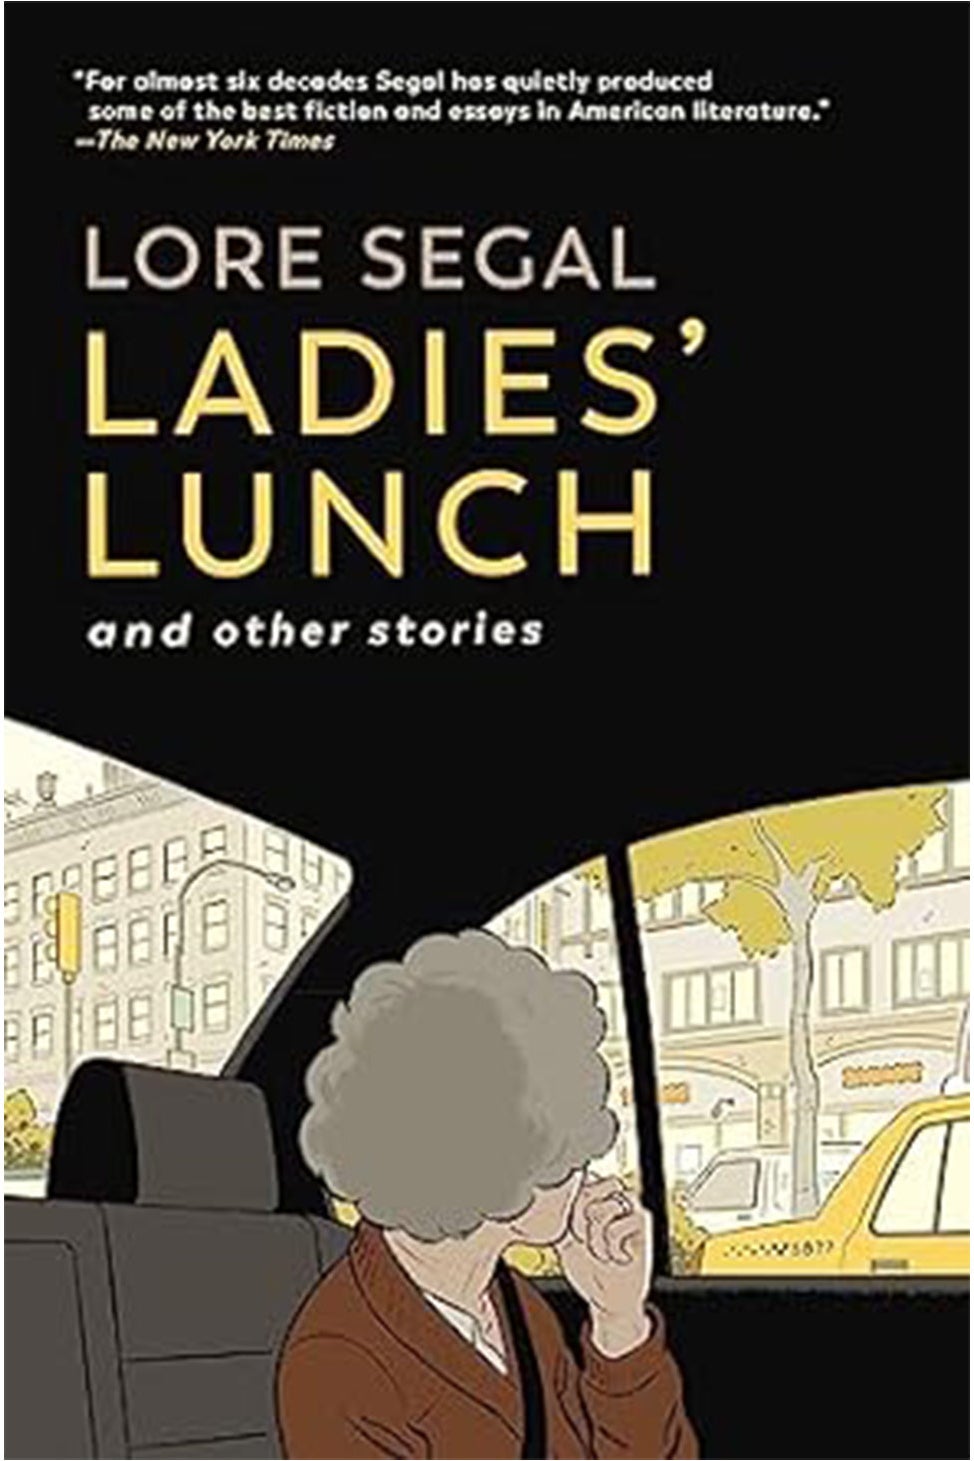 A book jacket features an illustration of a gray-haired woman seen from behind looking out the window of a yellow taxicab.